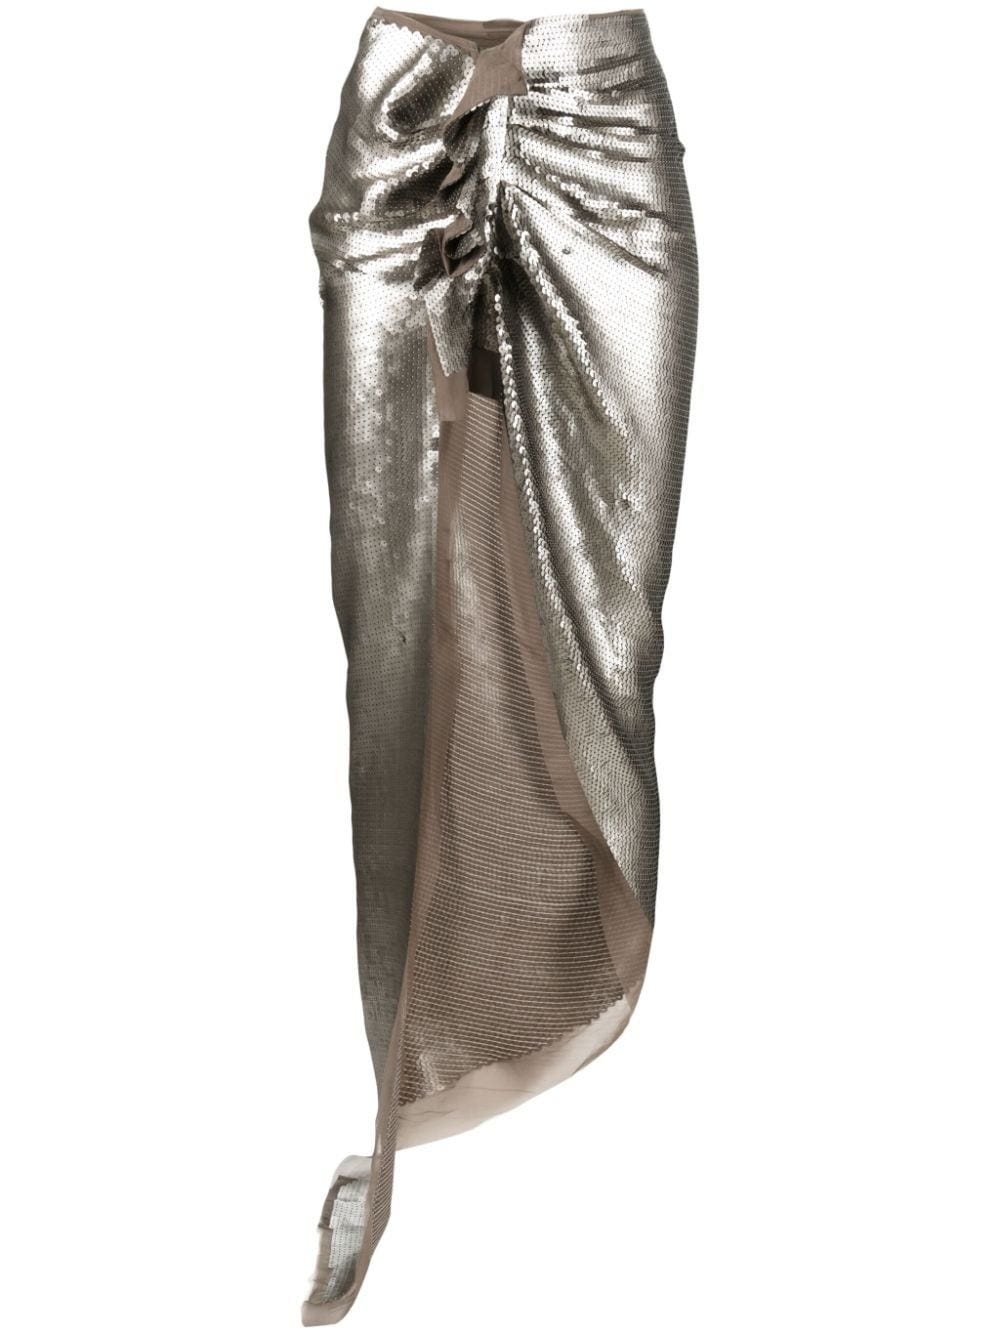 RICK OWENS SILVER ASYMMETRICAL SKIRT WITH SIDE SLIT